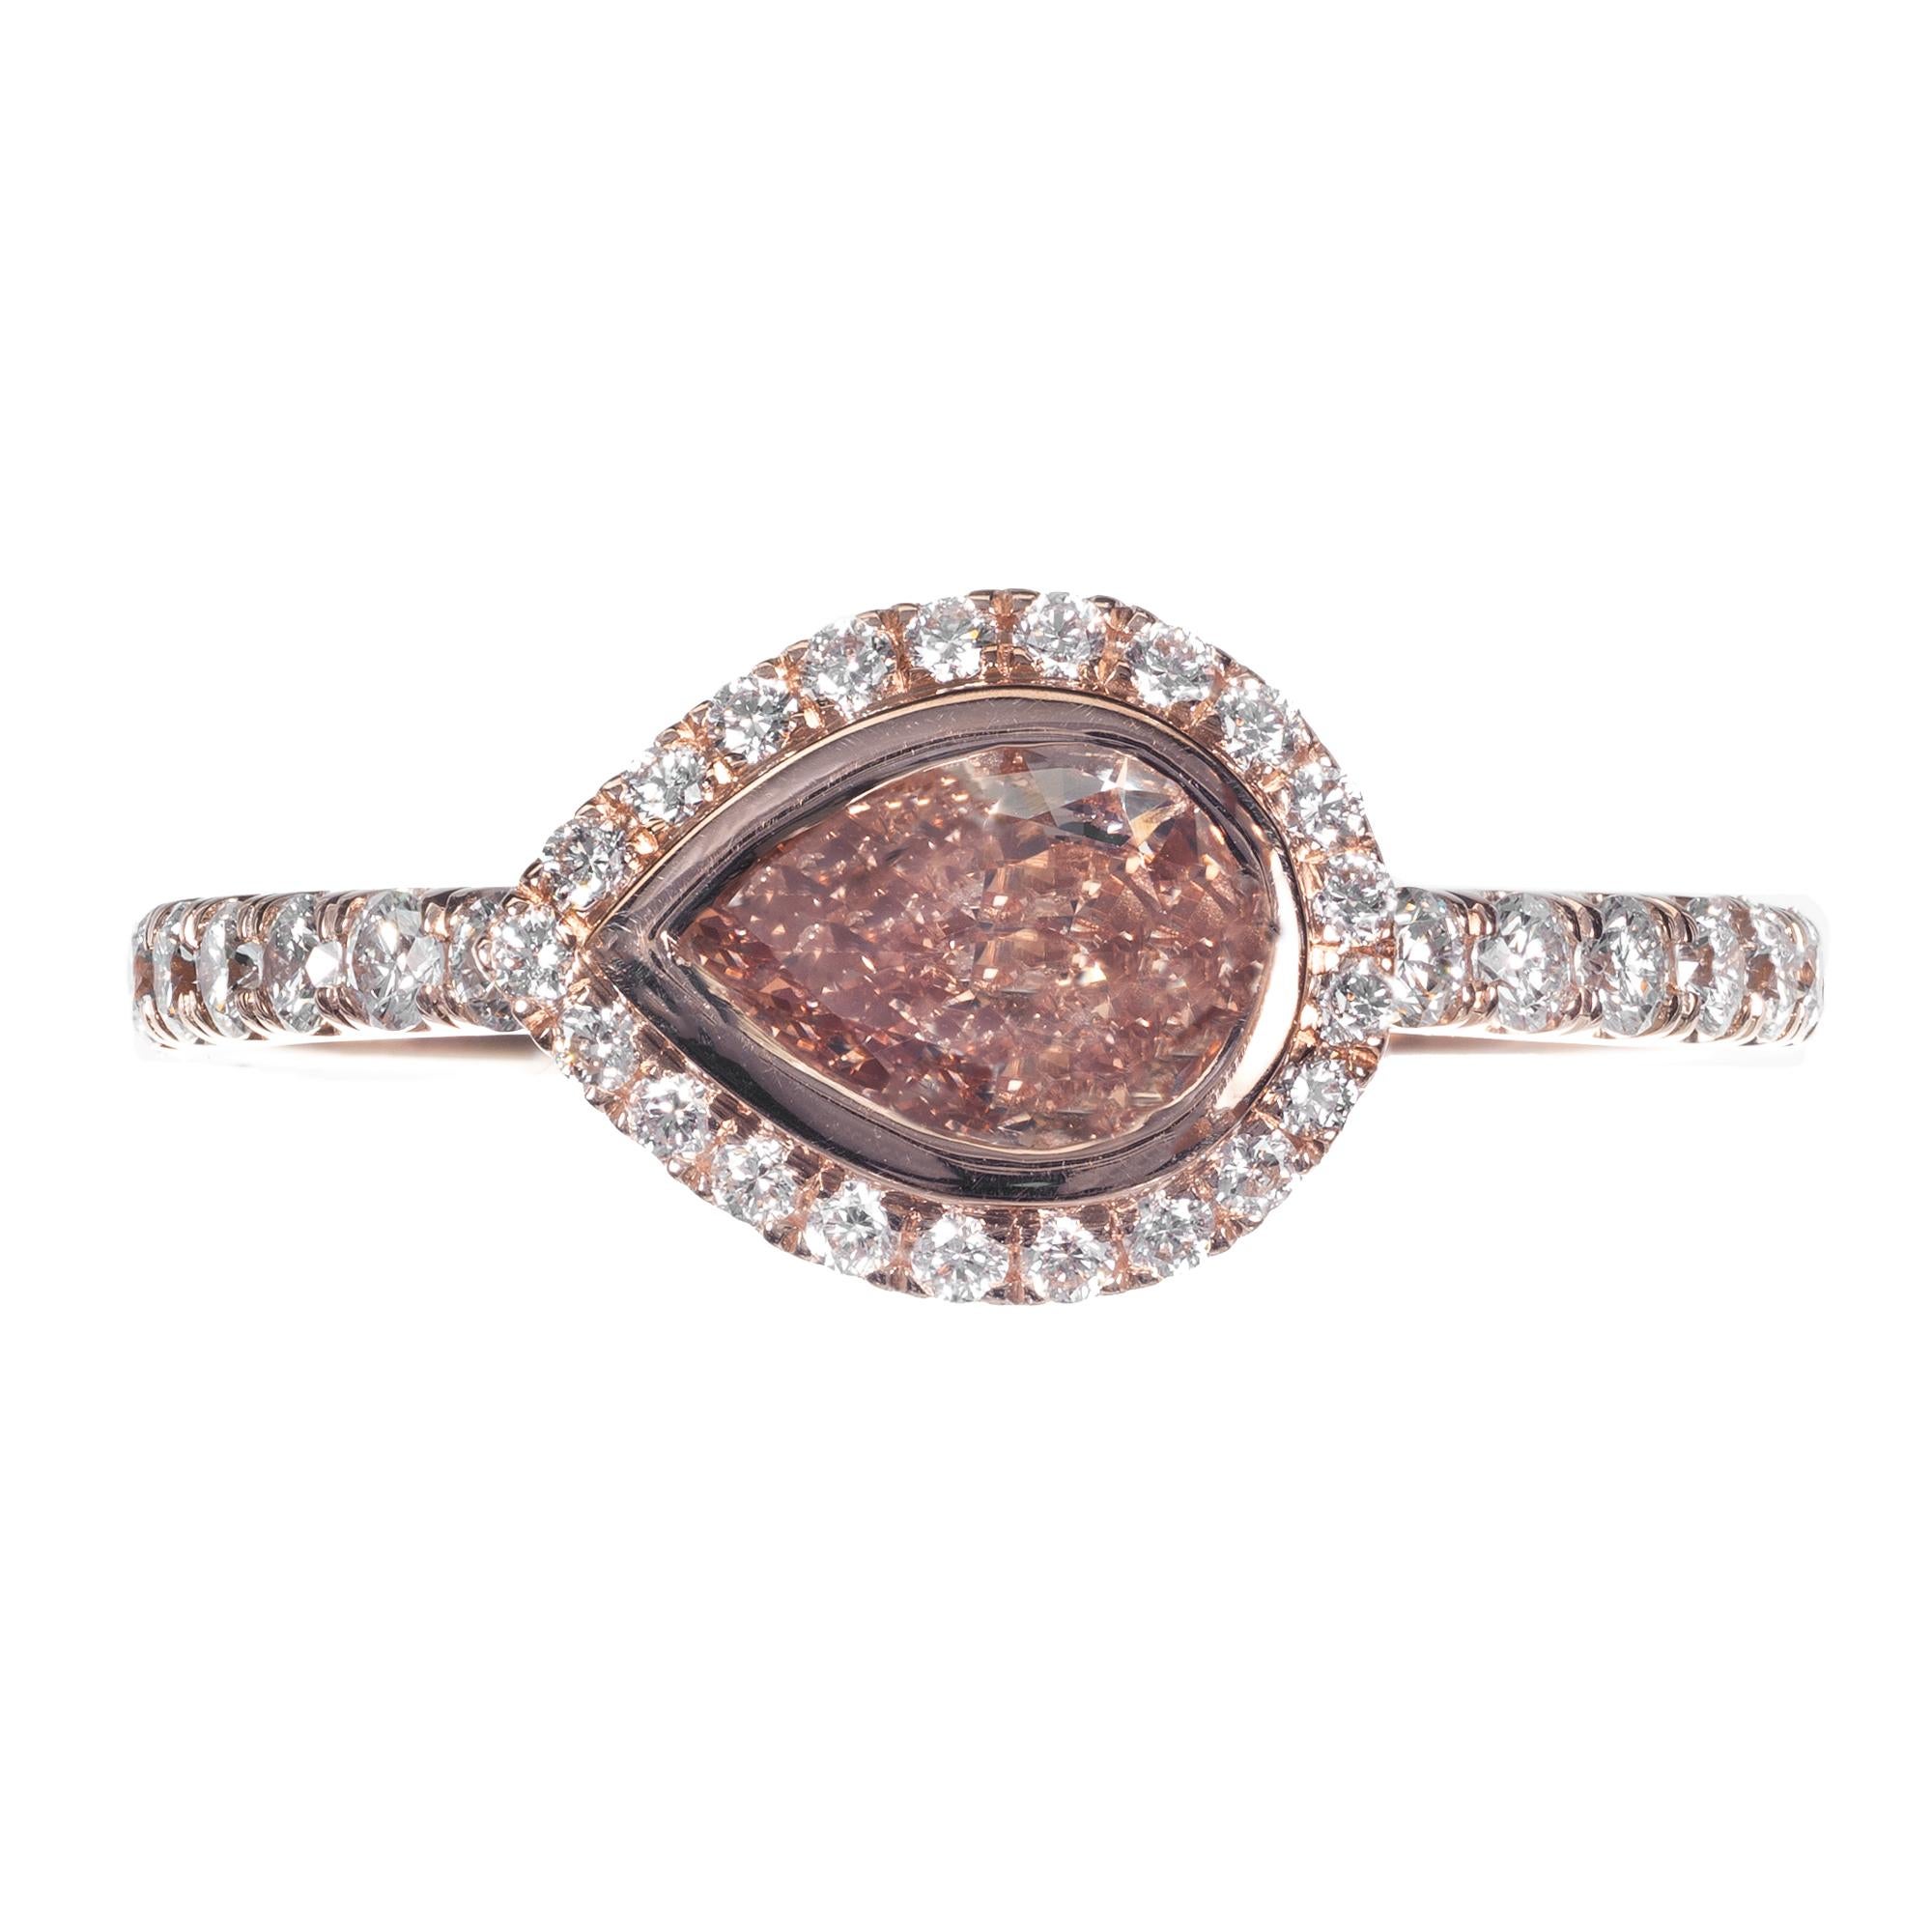 Pear shape natural fancy brown orange diamond engagement ring. Pear set center brown yellow diamond center stone with a round white diamond halo. 14 rose gold setting set with with micro pave set diamonds. Designed in the Peter Suchy Workshop.

1